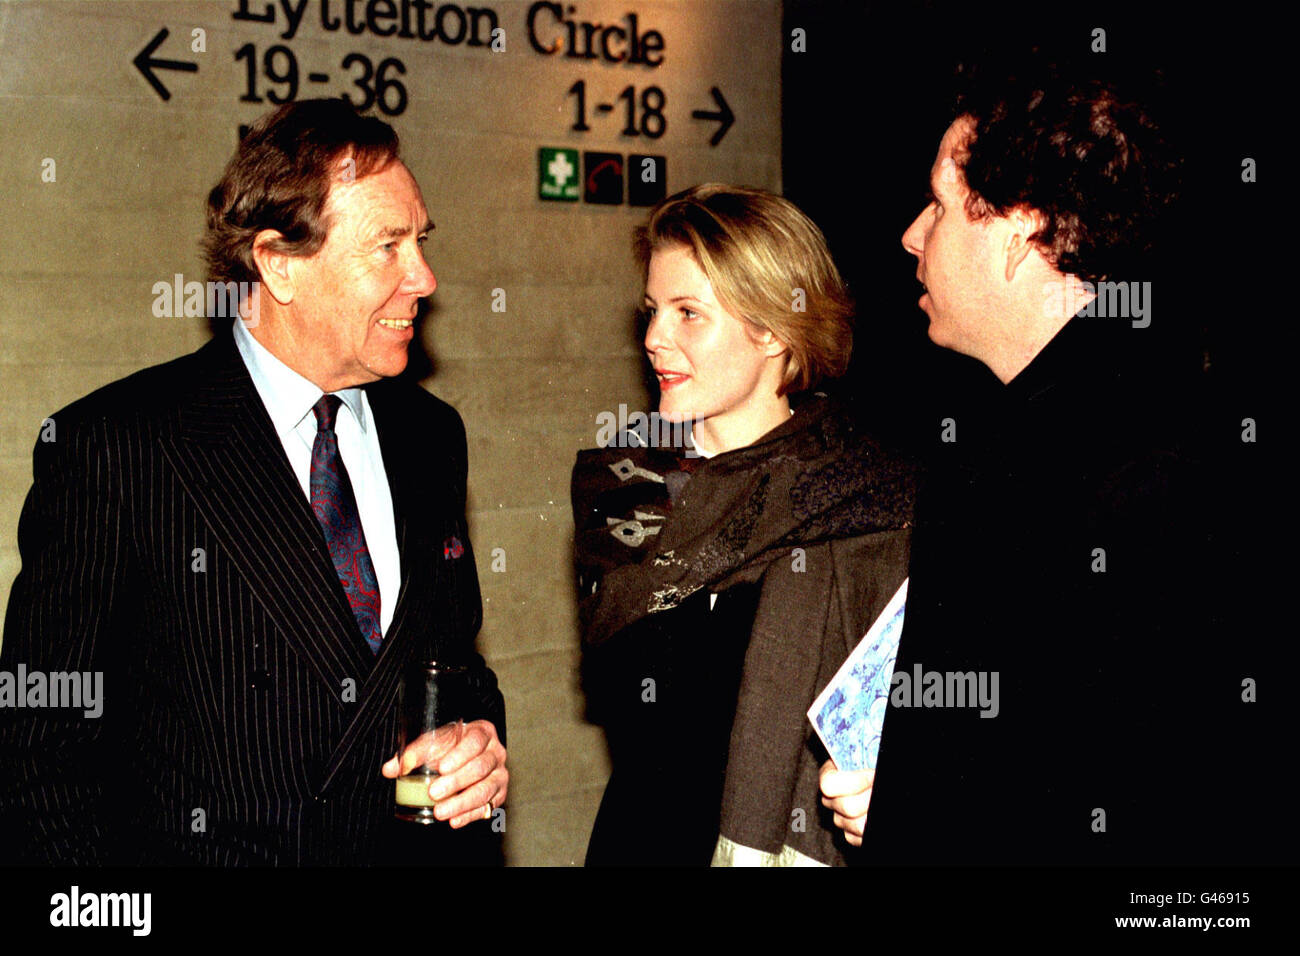 LONDON : 13/1/97 : LORD SNOWDON (LEFT) TALKS TO DAVID AND SERENA LINLEY AT THE NATIONAL THEATRE AT THE LAUNCH OF AN EXHIBITION OF SNOWDON'S PHOTOGRAPHS. PA NEWS PHOTO BY DAVE CHESKIN. Stock Photo